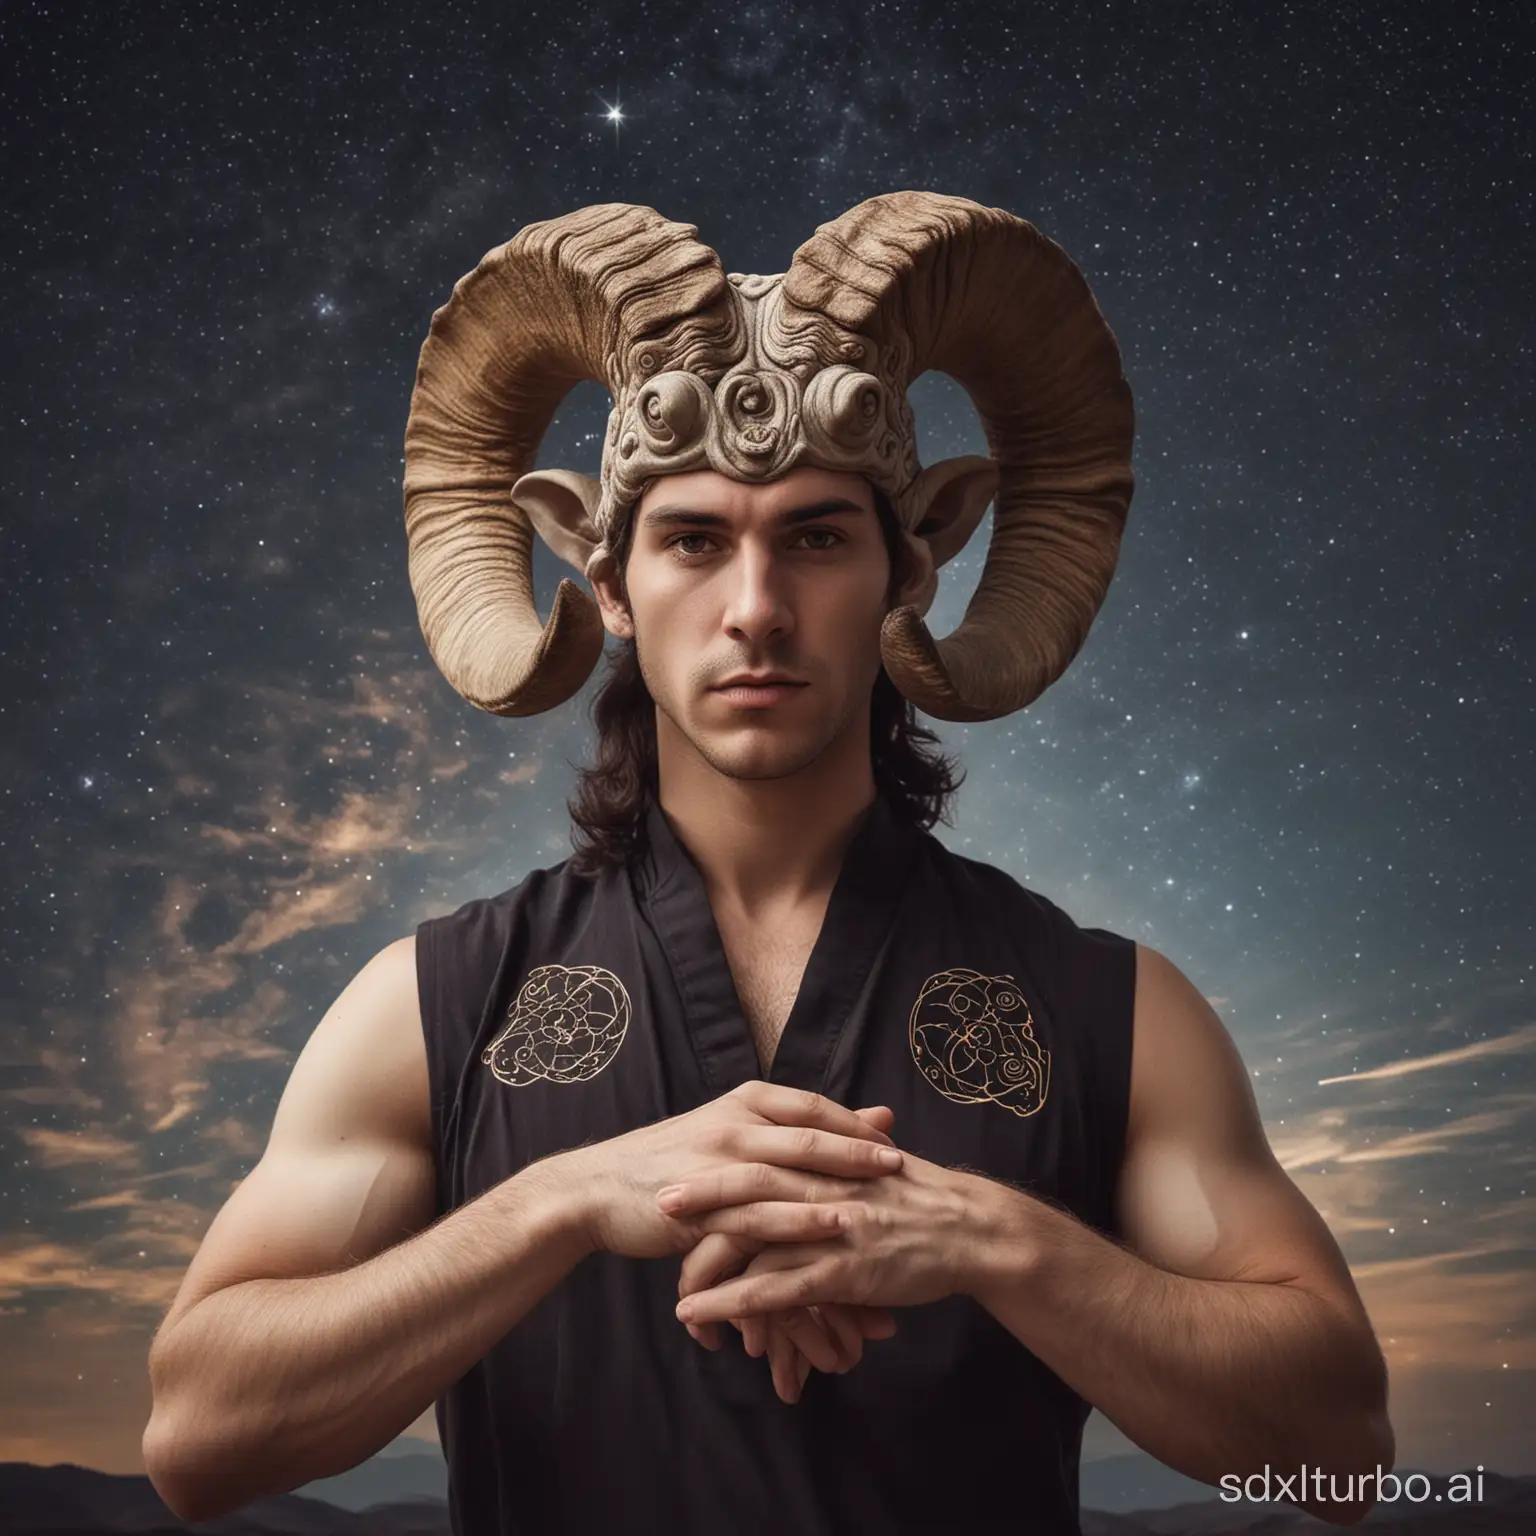 Take a photograph of a man who embodies the sign of the zodiac Aries